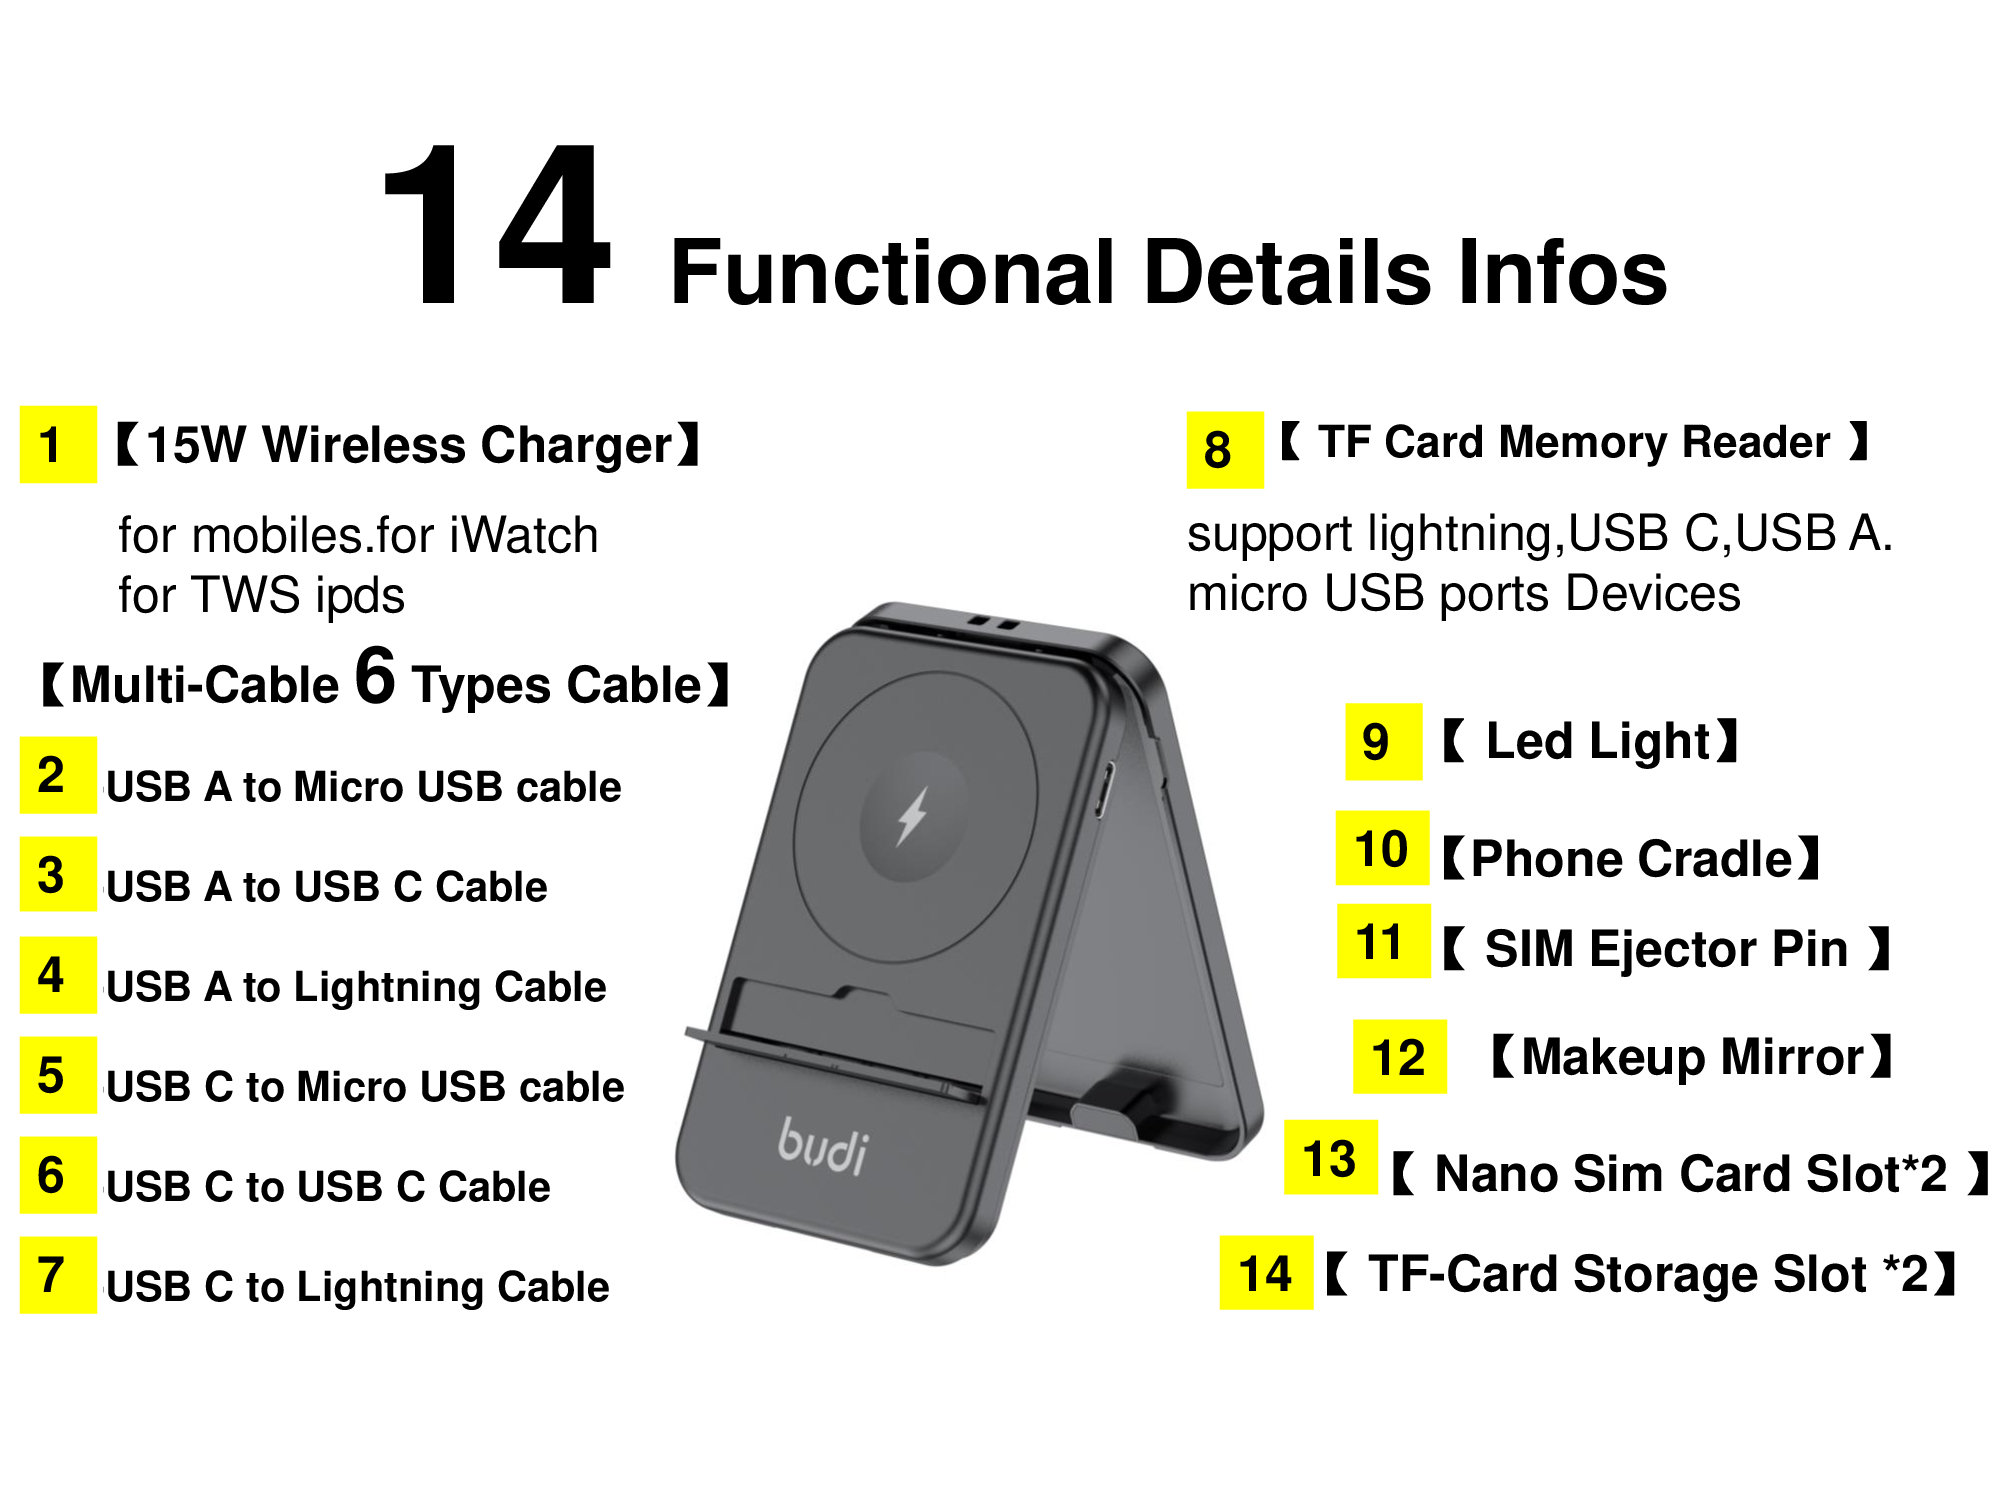 BUDI 14-IN-1 Multi-functional Box 15W (1 for 3) Wireless Charger Multi-Cable 6 Types Cable TF Card Memory Reader